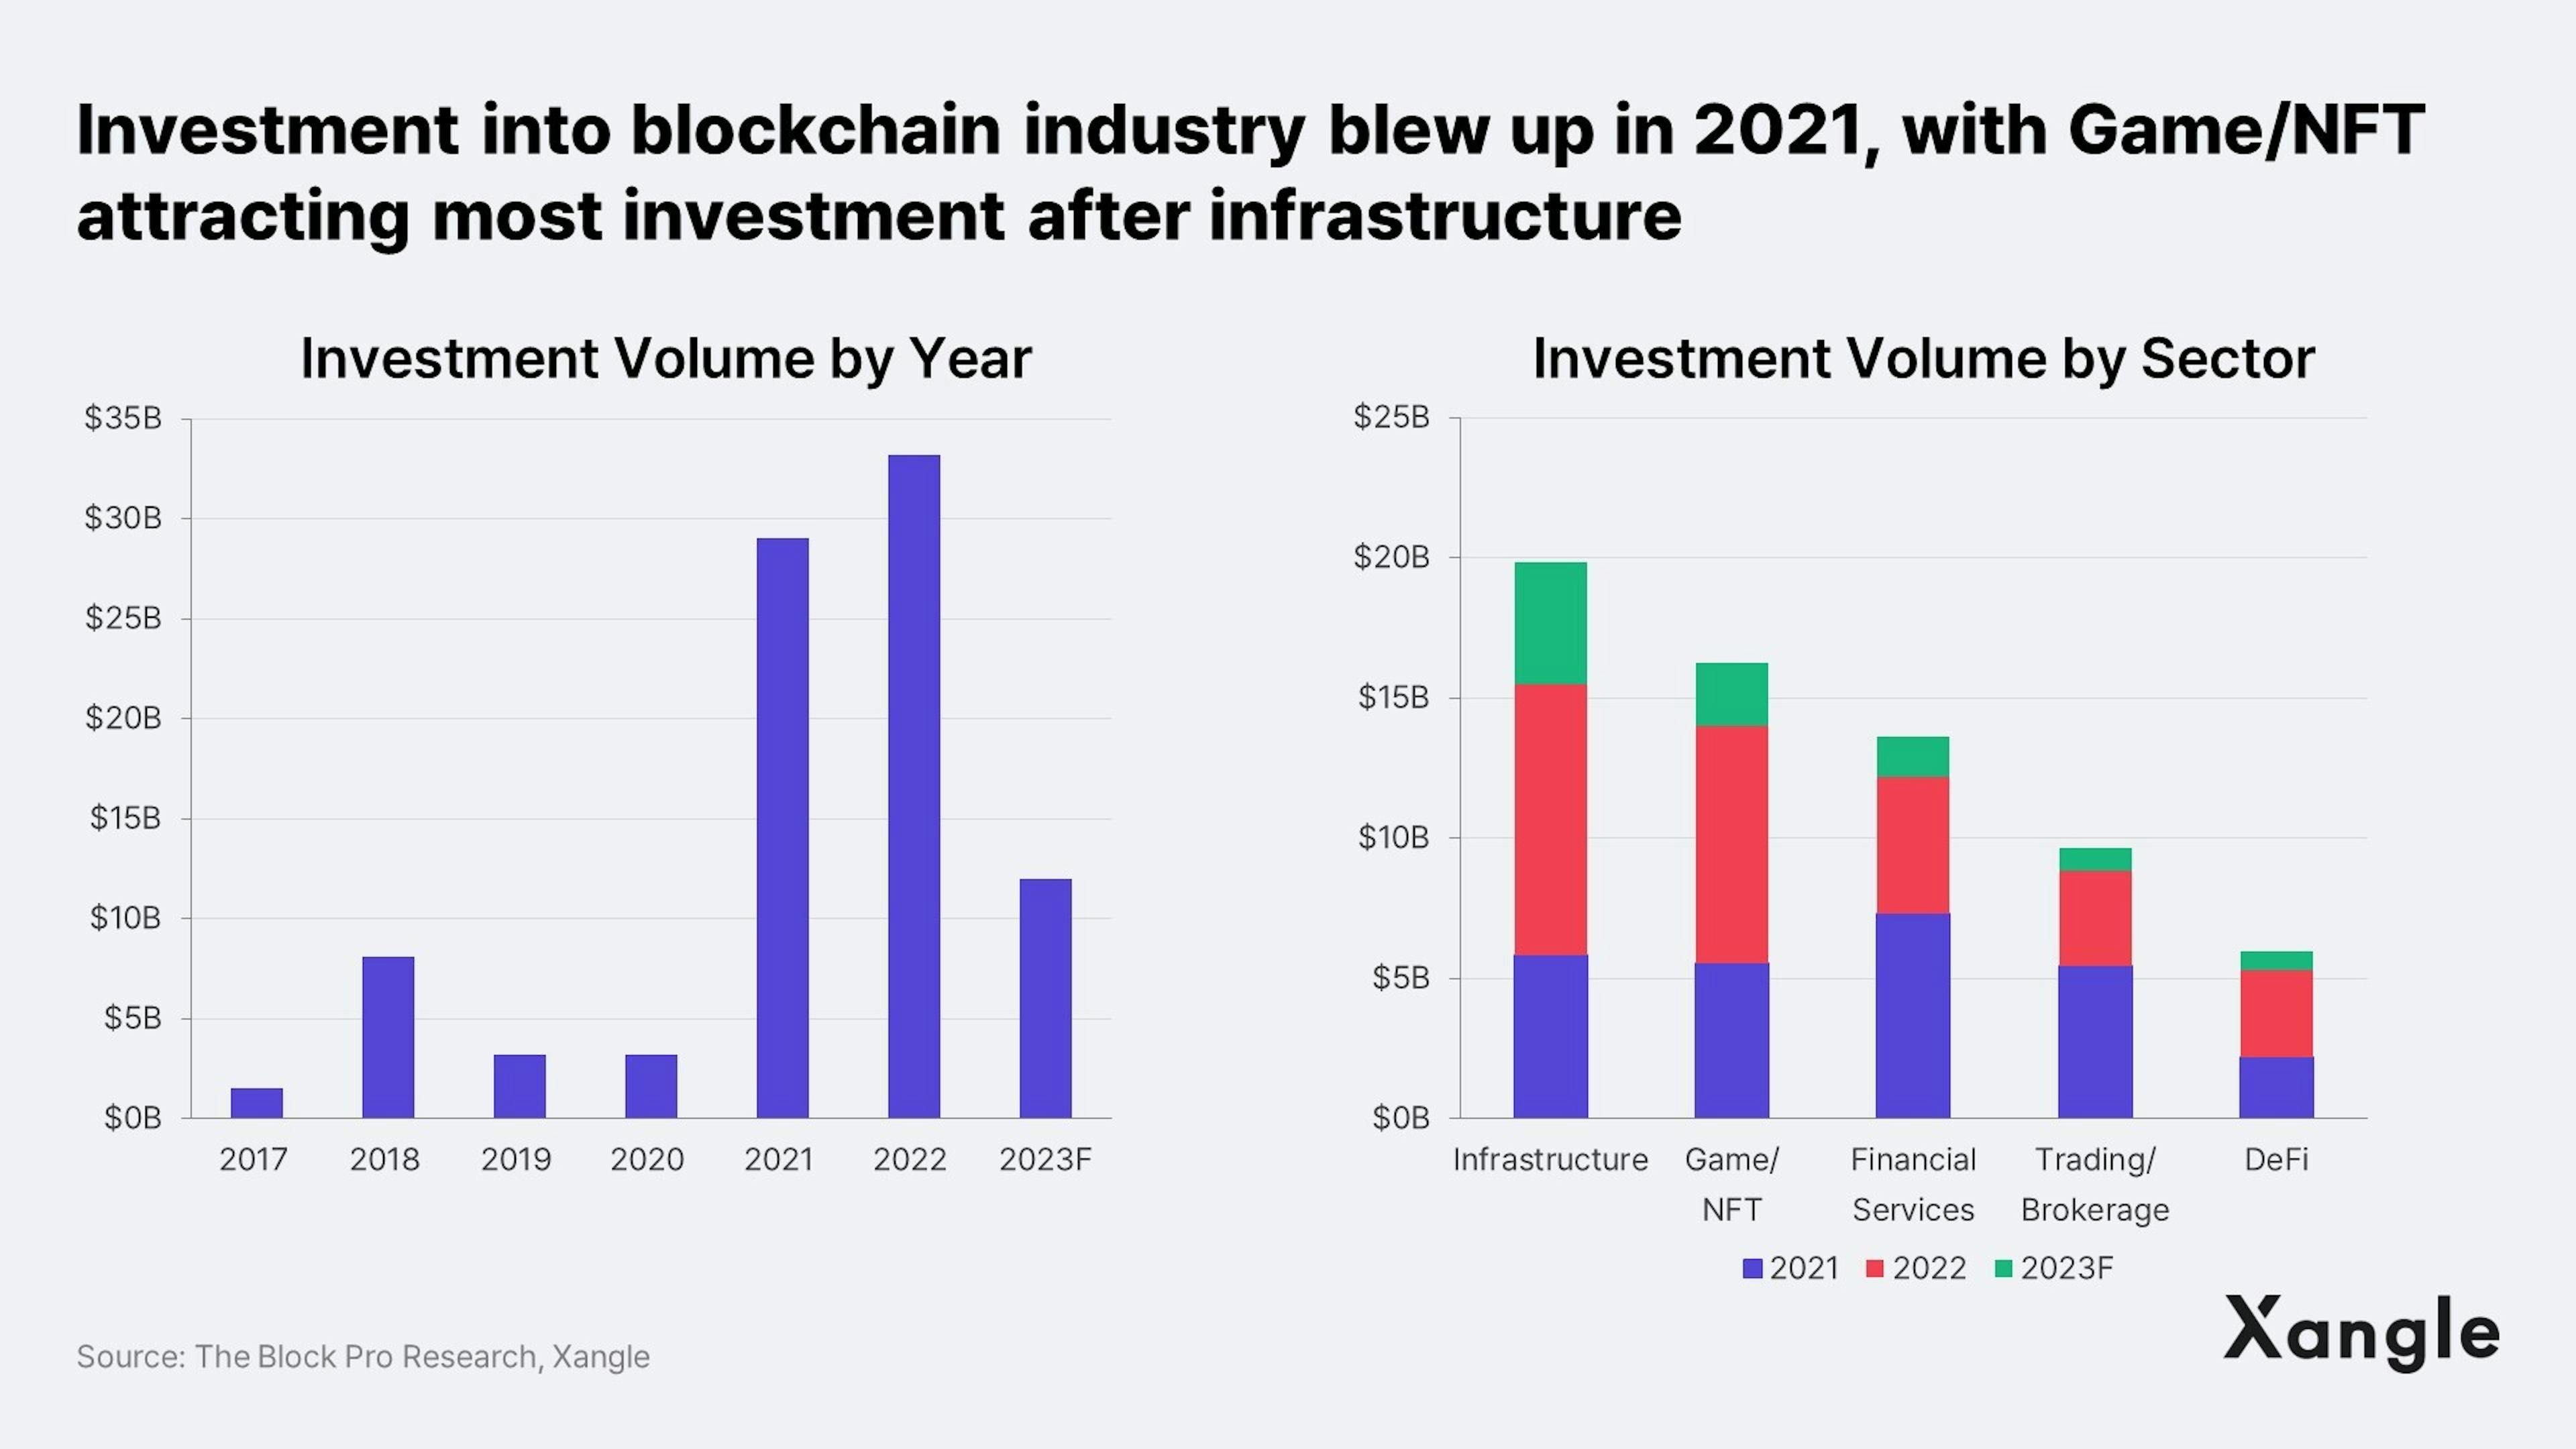 Gaming/NFT attracting most investment after infrastructure in 2021